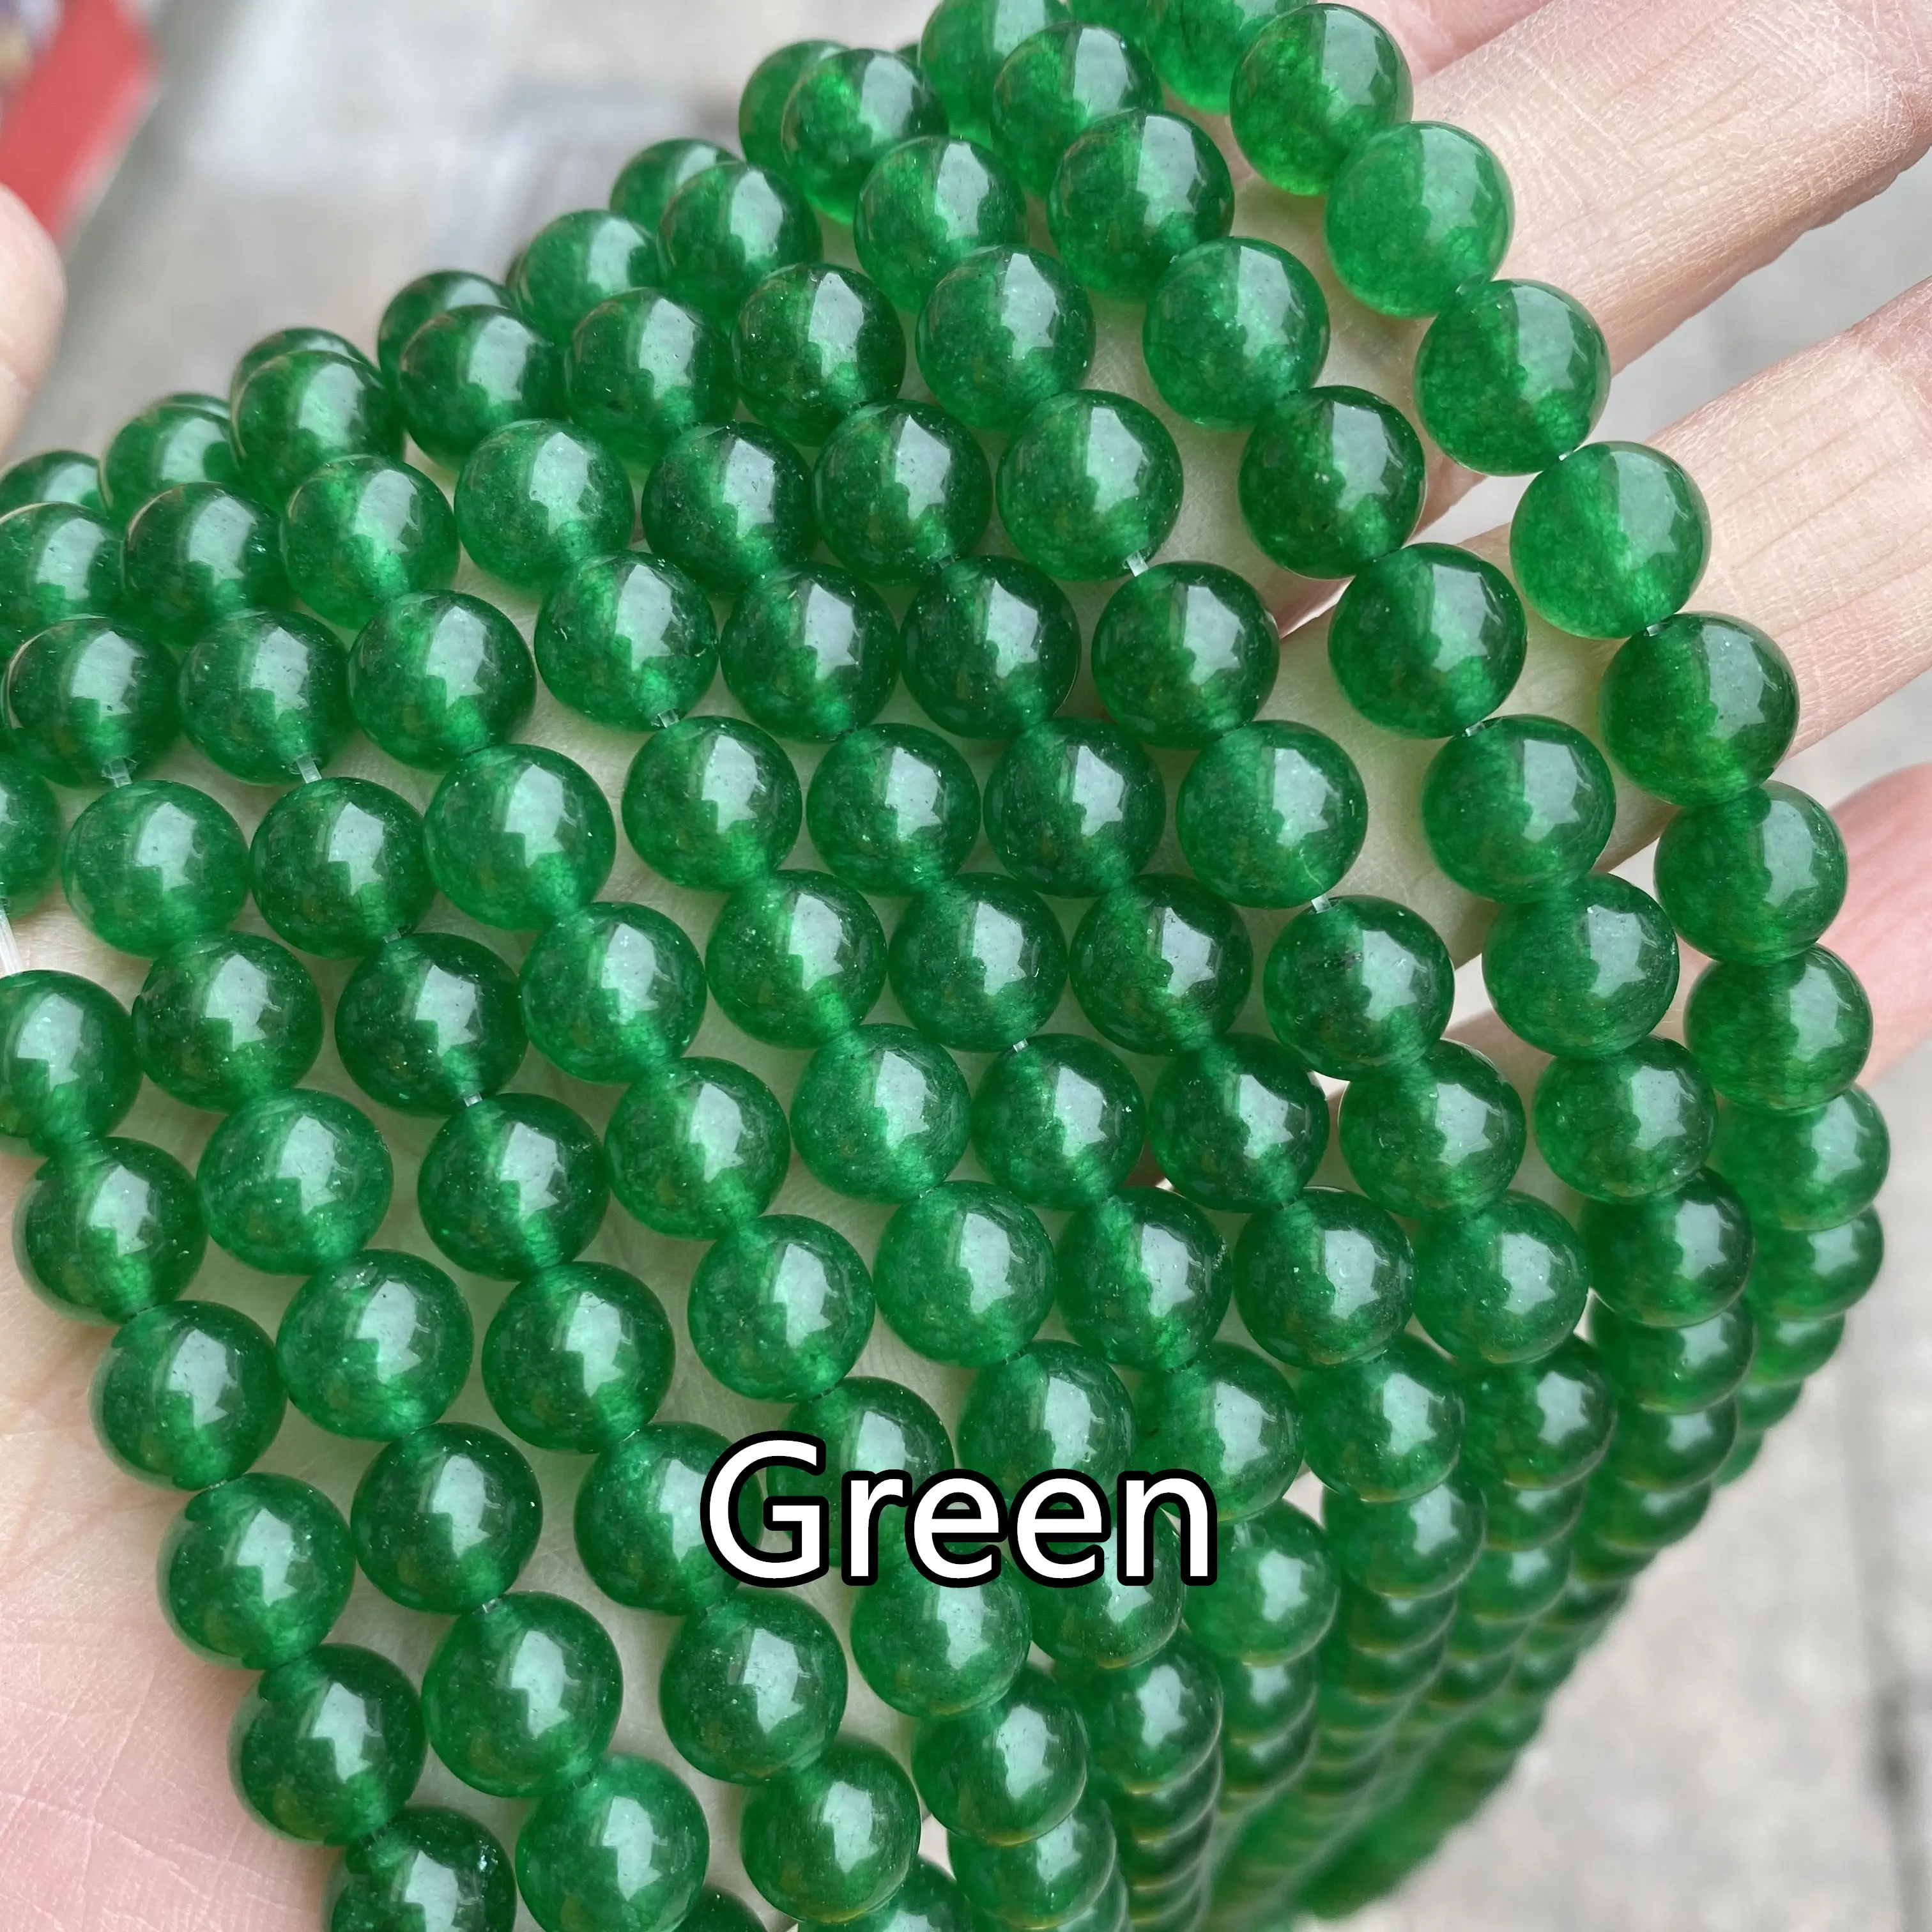 Gemstone Beads Stone Beads Wholesale 6 / 8 / 10 mm To Choose From DIY Bracelet Beads A-171 1 Full Strand Smooth Malay Jade Round Beads